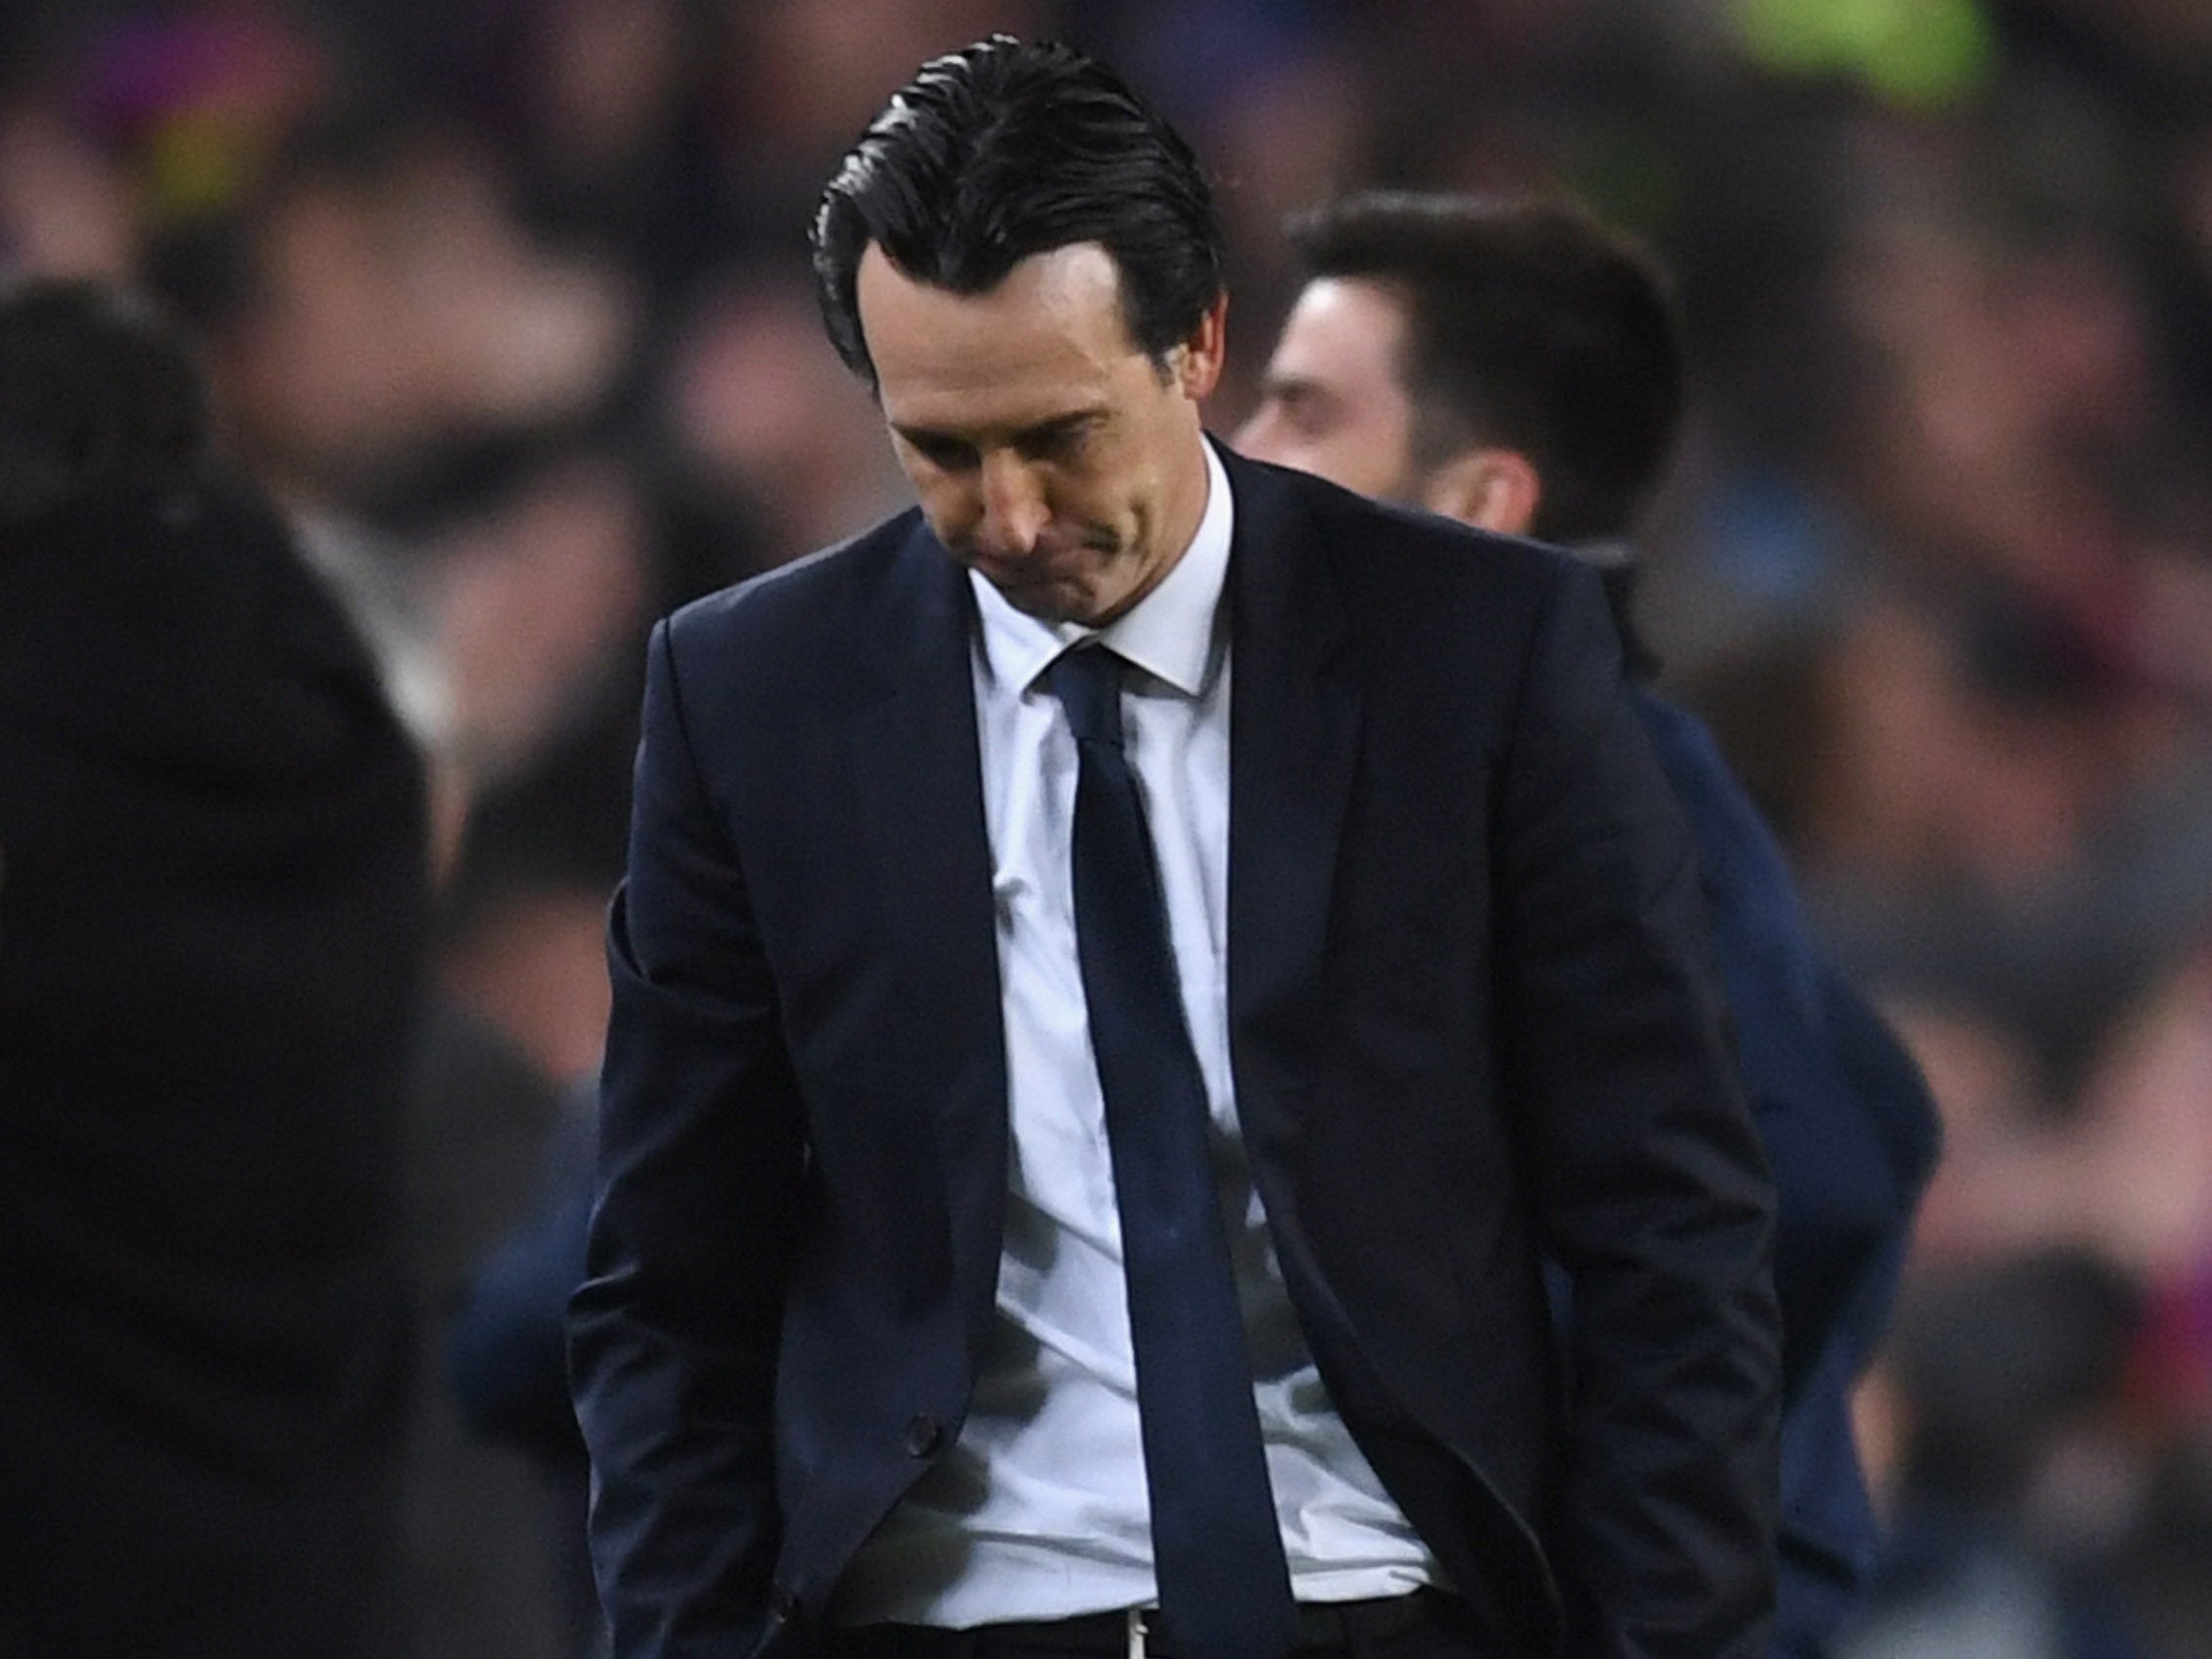 Emery is likely to lose his job in the summer after crashing out of Europe